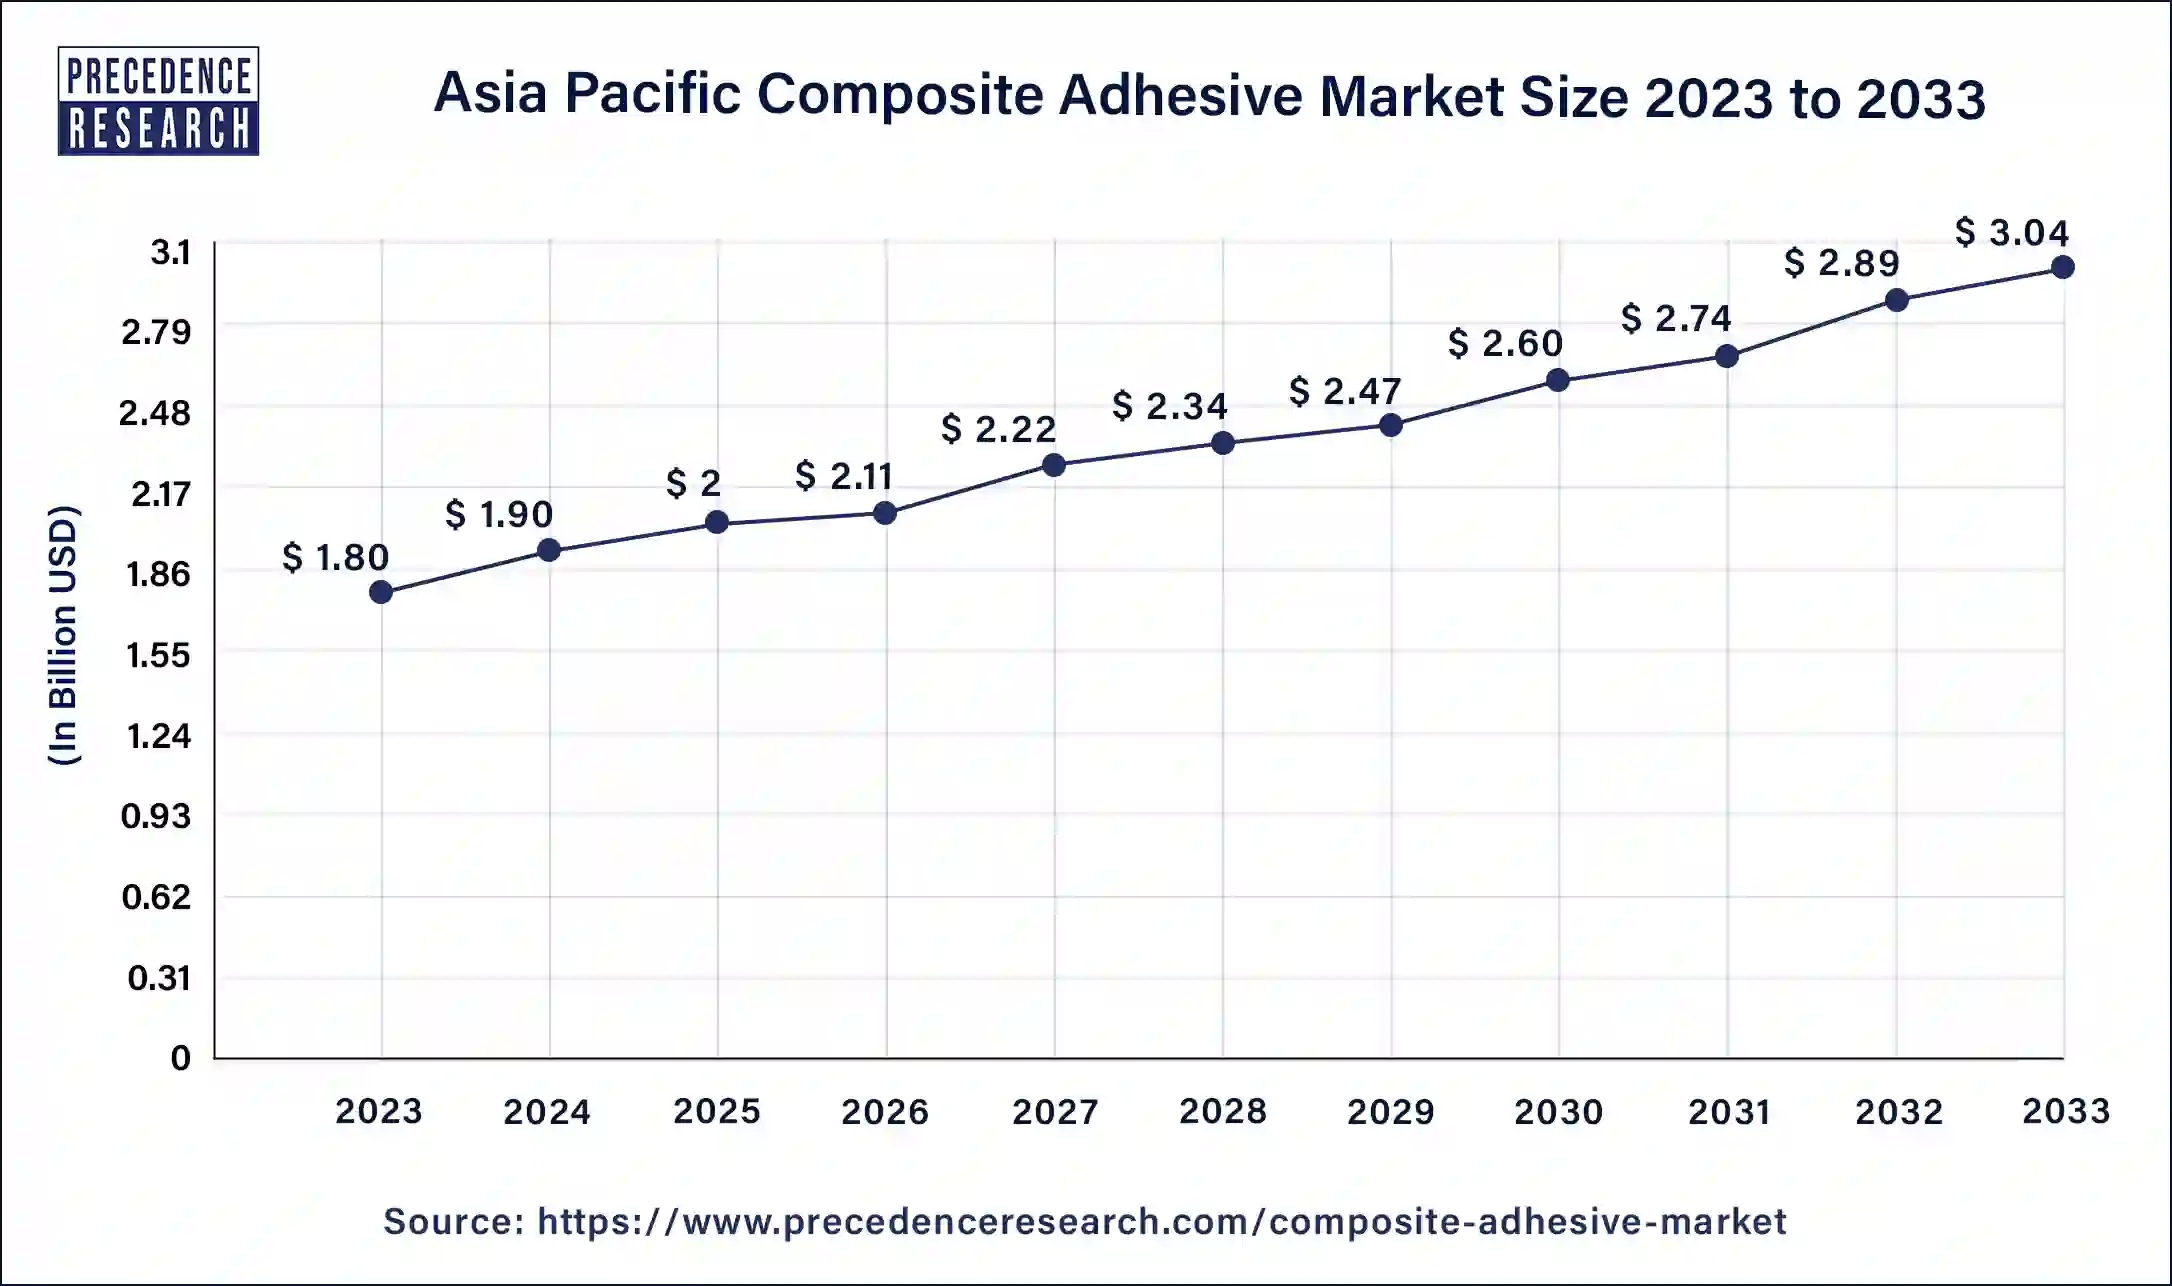 Asia Pacific Composite Adhesive Market Size 2024 to 2033